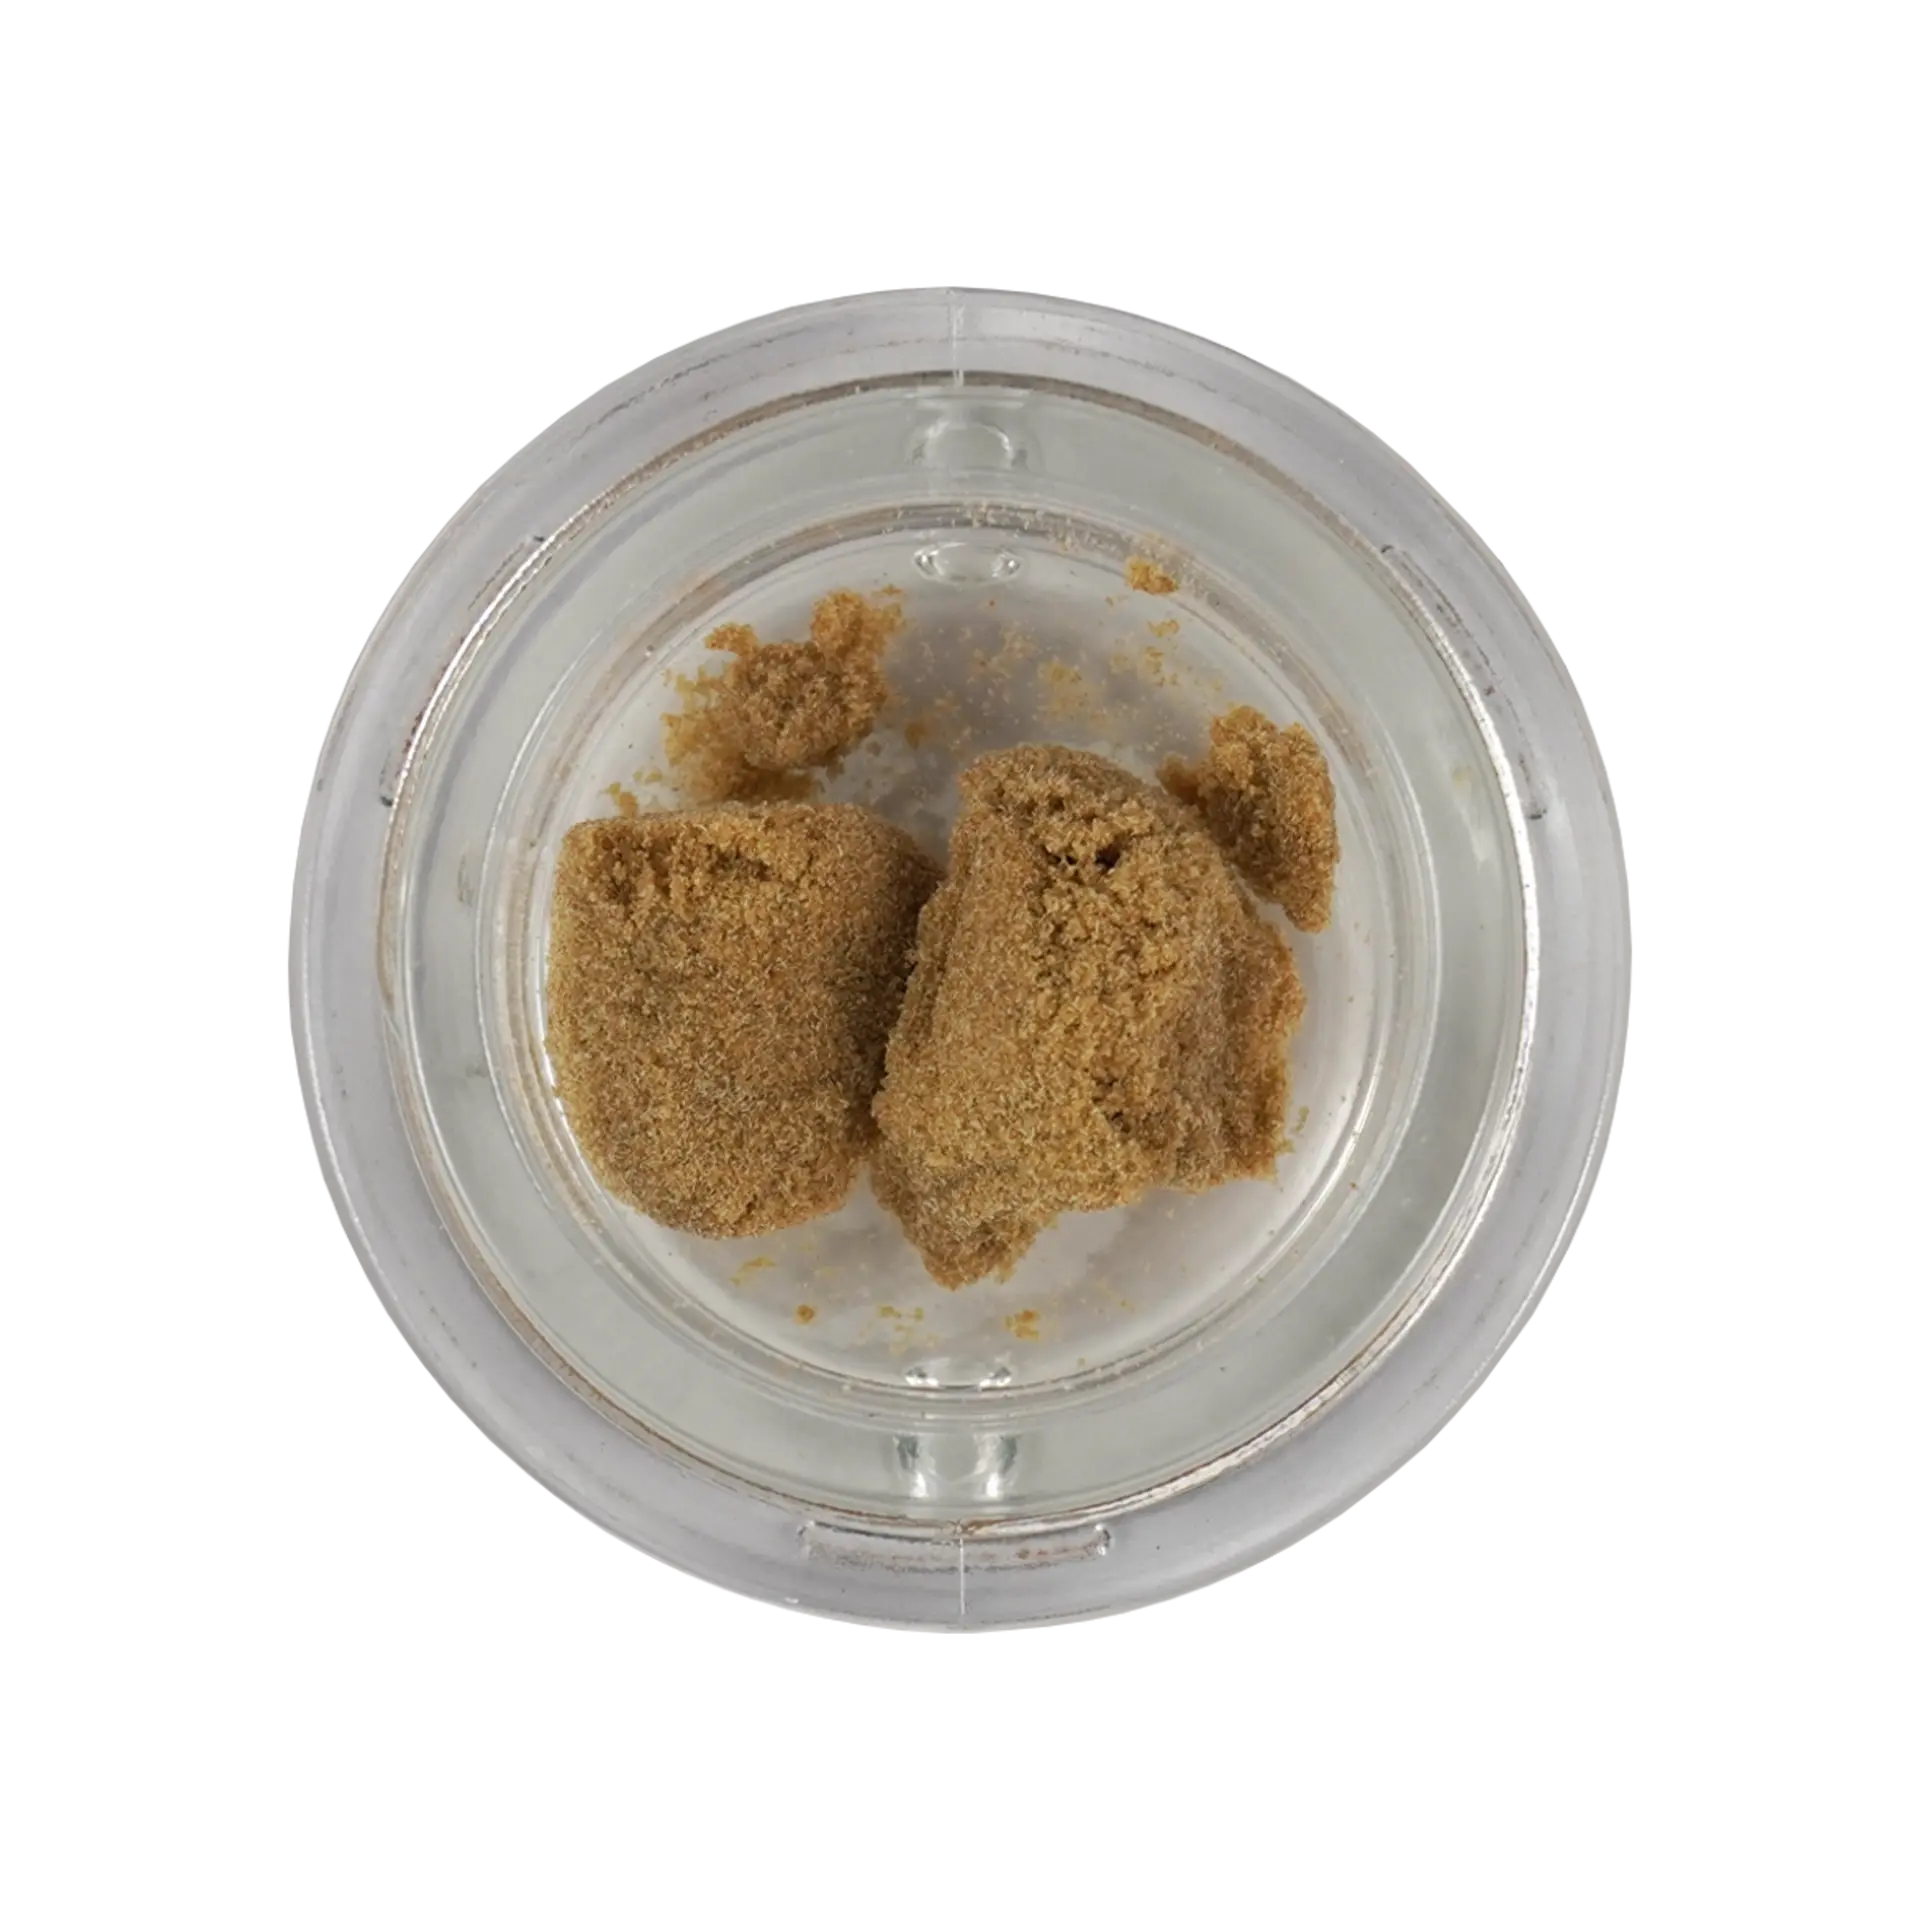 GG4 X Death Star Bubble Hash 1g, 1 of 1